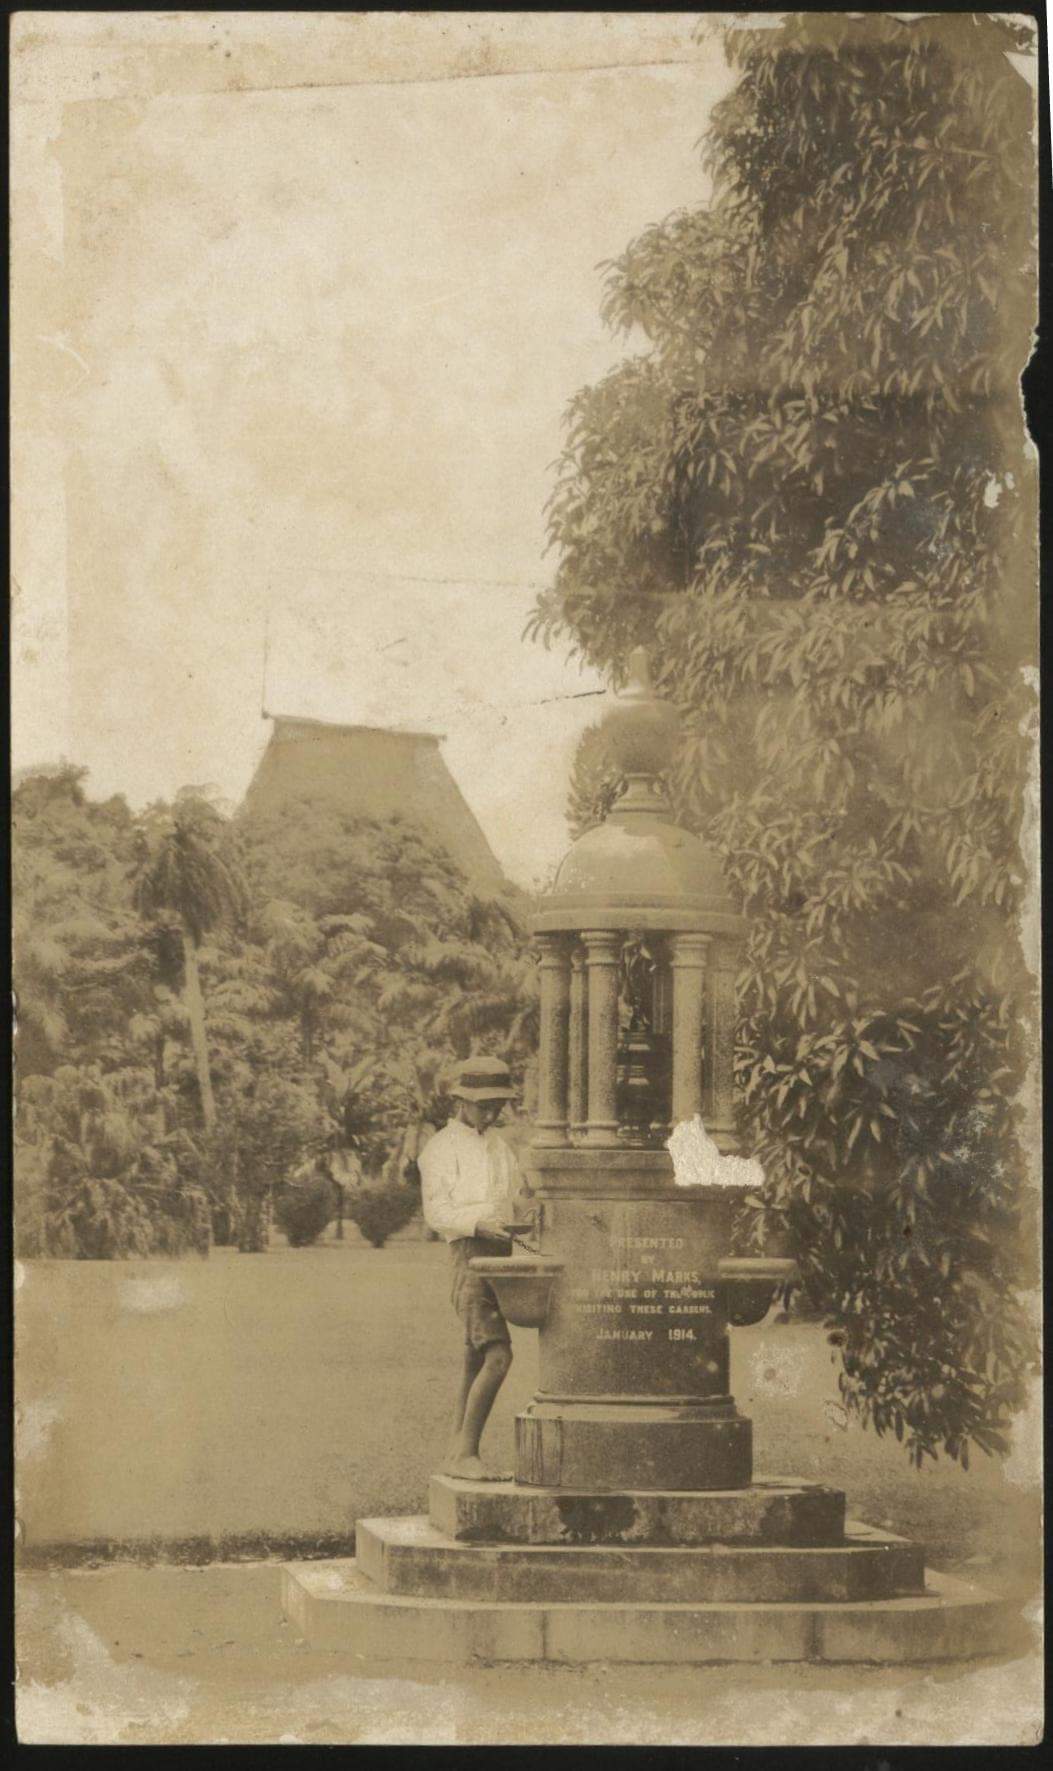 "Drinking fountain with the inscription Presented by Henry Marks for the use of the public visiting these gardens January 1914" Source: Fiji Museum Facebook page